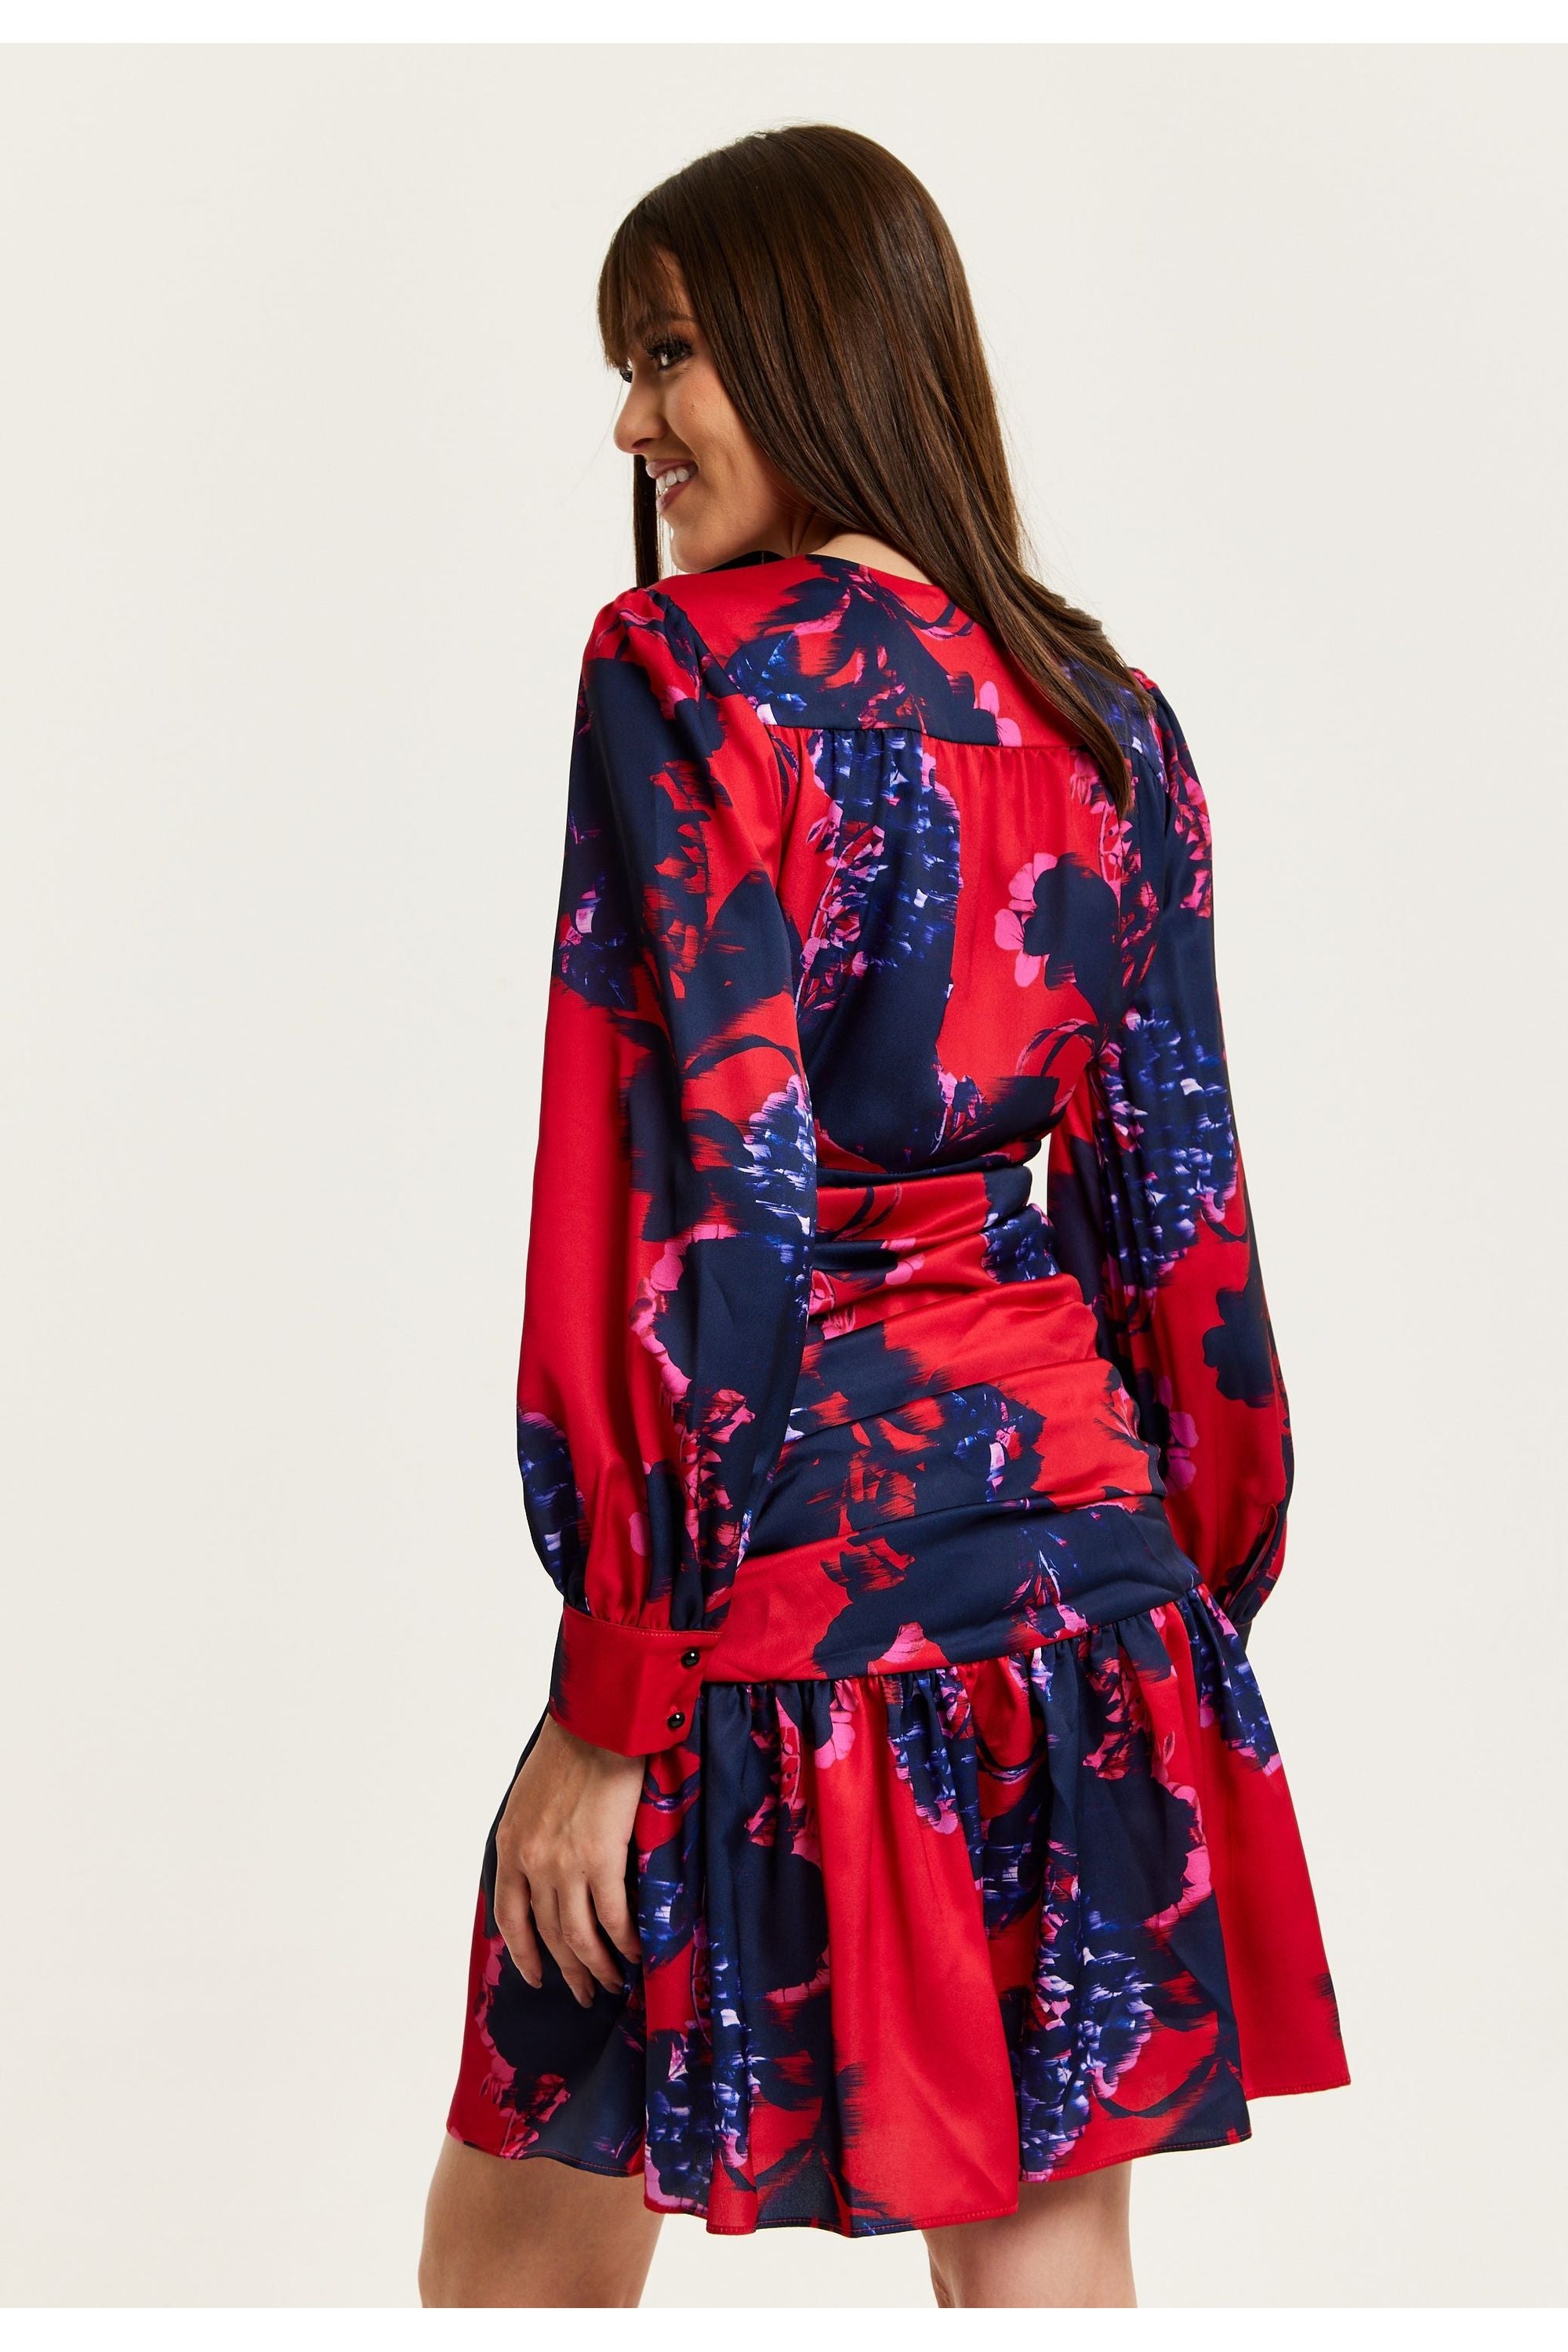 Floral Print Red Mini Dress With Long Sleeves G21-LIQ23AW011